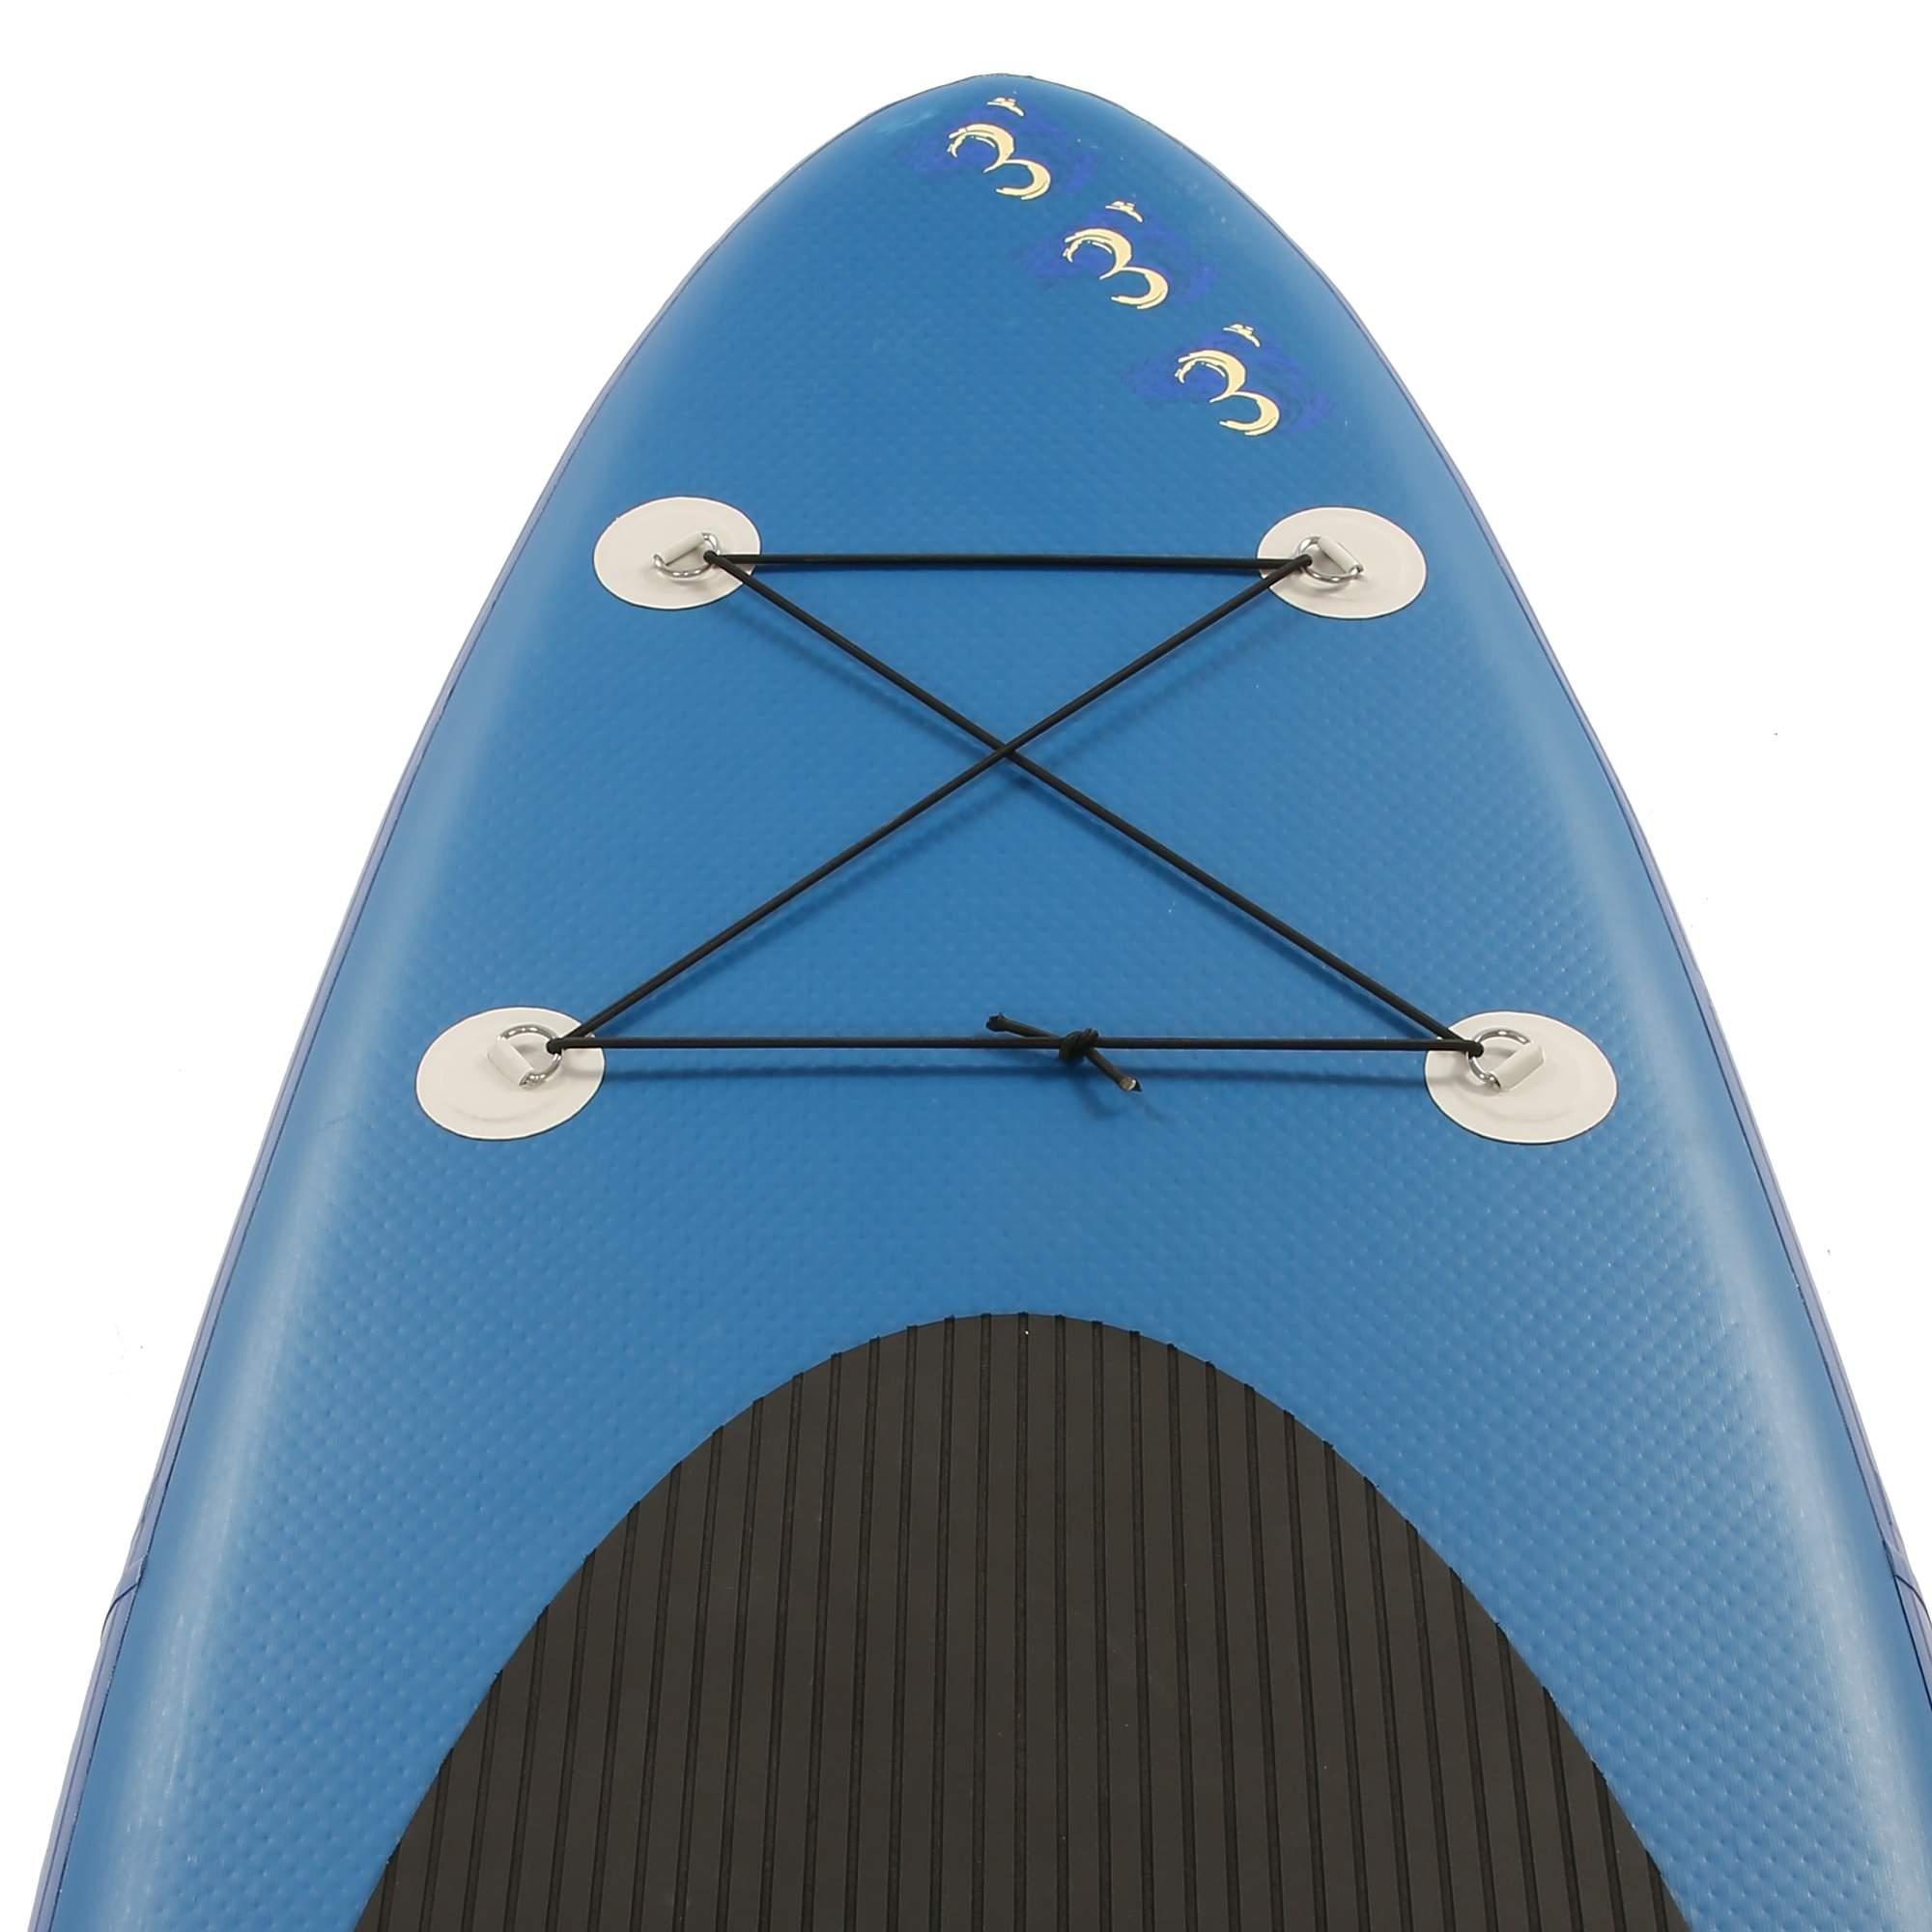 Vivi 10.5 FT Portable Inflatable Stand Up Surfboard Paddle Board Deck, Removable Large Fin Skill Levels Adult Single-layer Surf Board